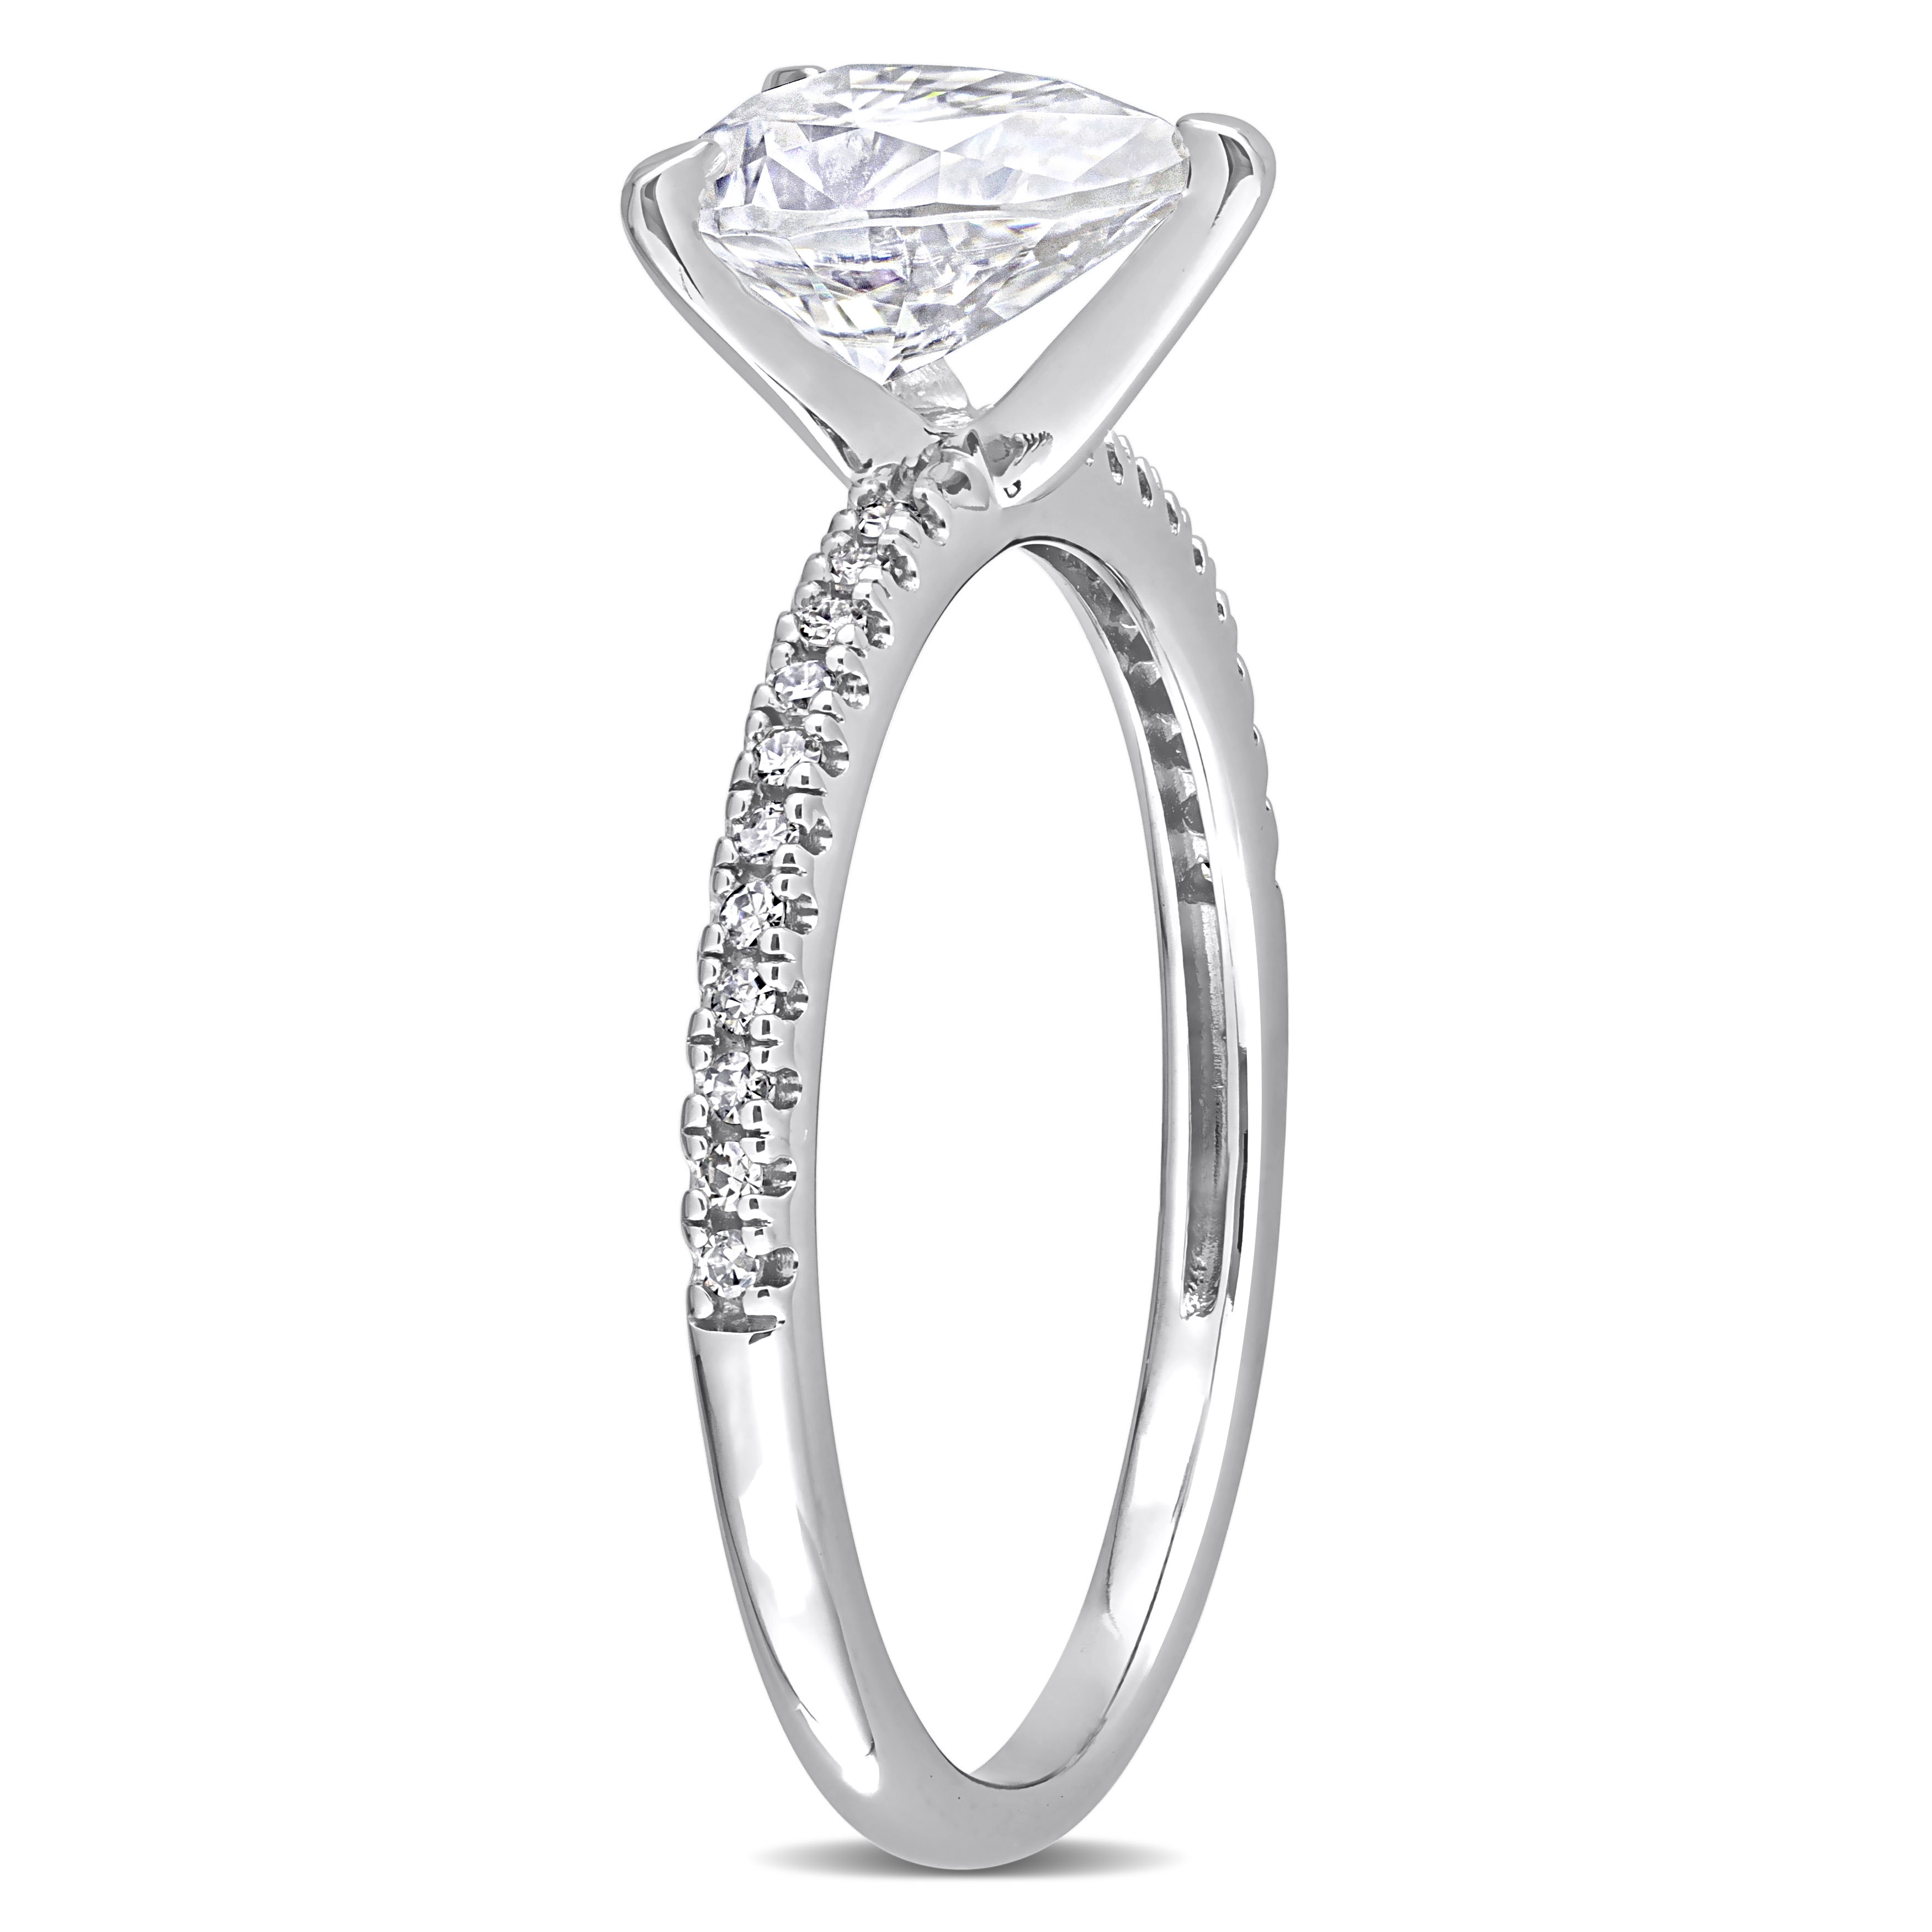 1 1/4 CT DEW Pear Shape Created Moissanite and 1/10 CT TW Diamond Engagement Ring in 14k White Gold